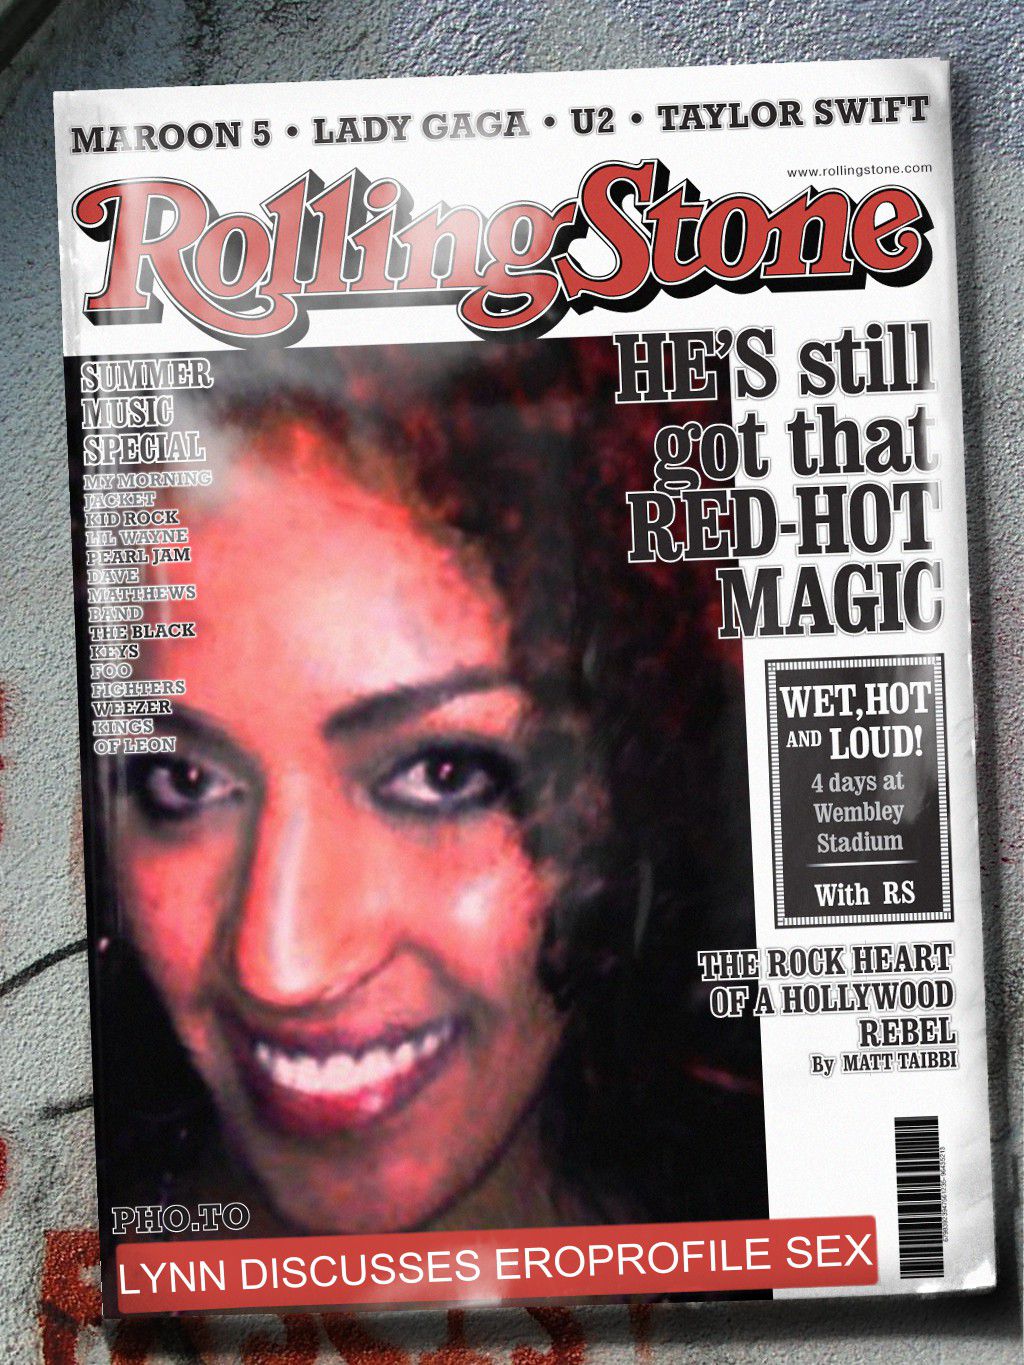 LOL, this is funny, I give a Rolling Stone interview! Ha! I can't even imagine this